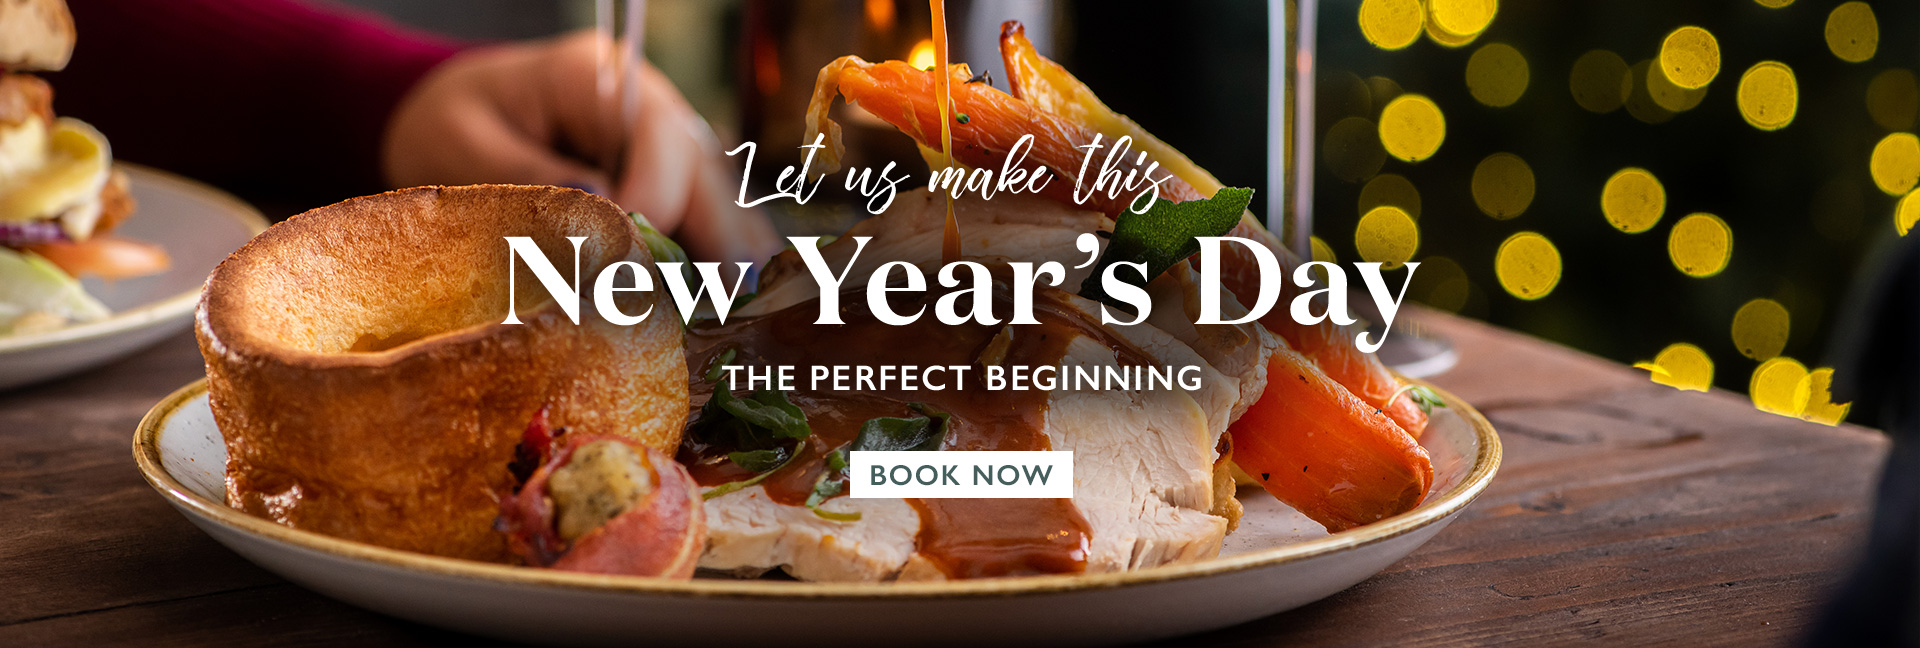 New Year’s Day Menu at The Lion 